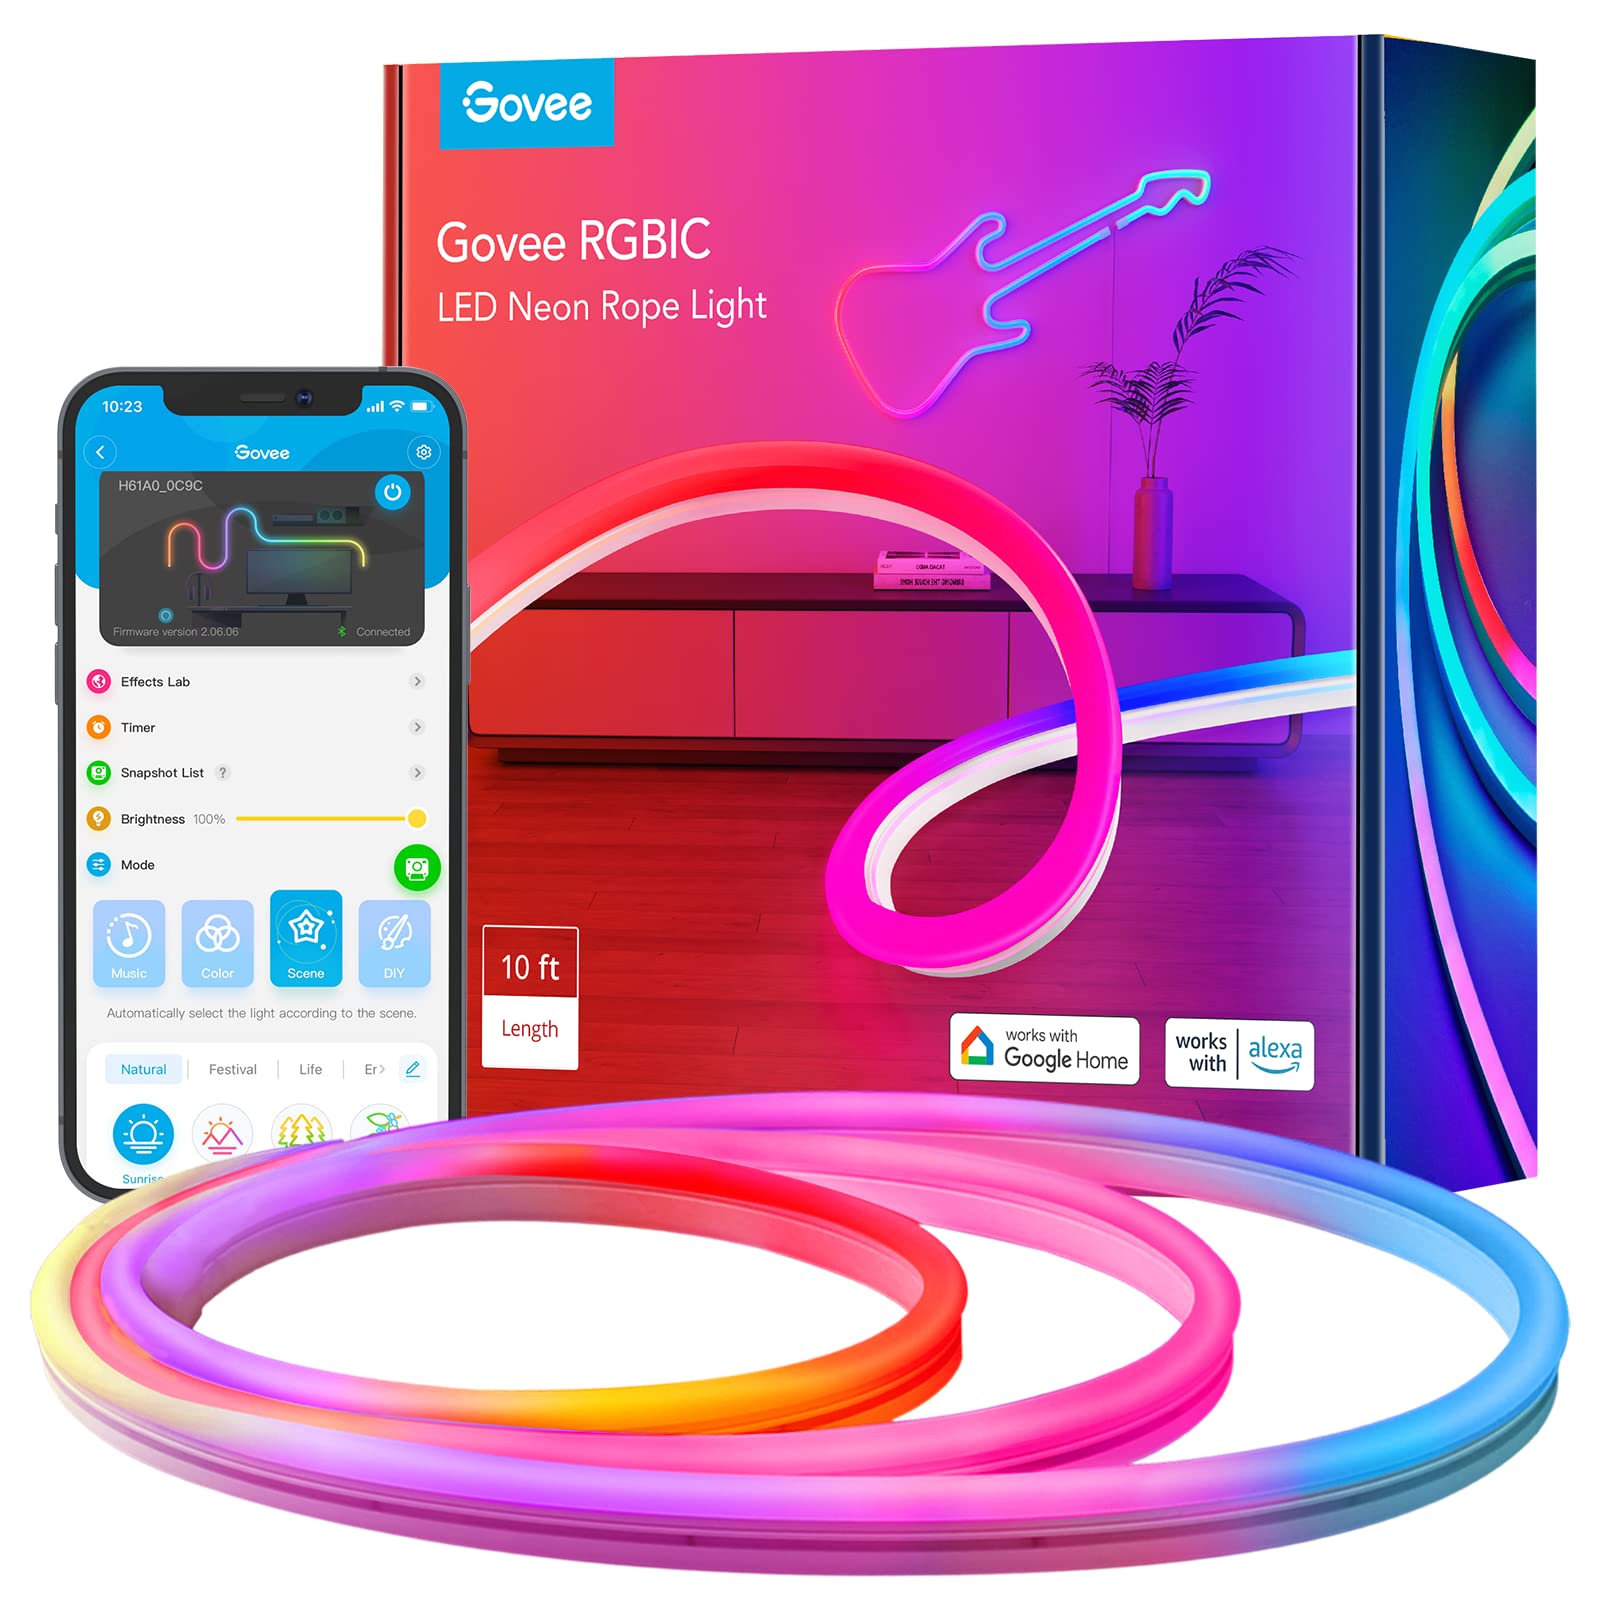 10' Govee Neon RGBIC LED Rope Lights w/ Music Sync (Works with Alexa, Google Assistant) $45.49 + Free Shipping